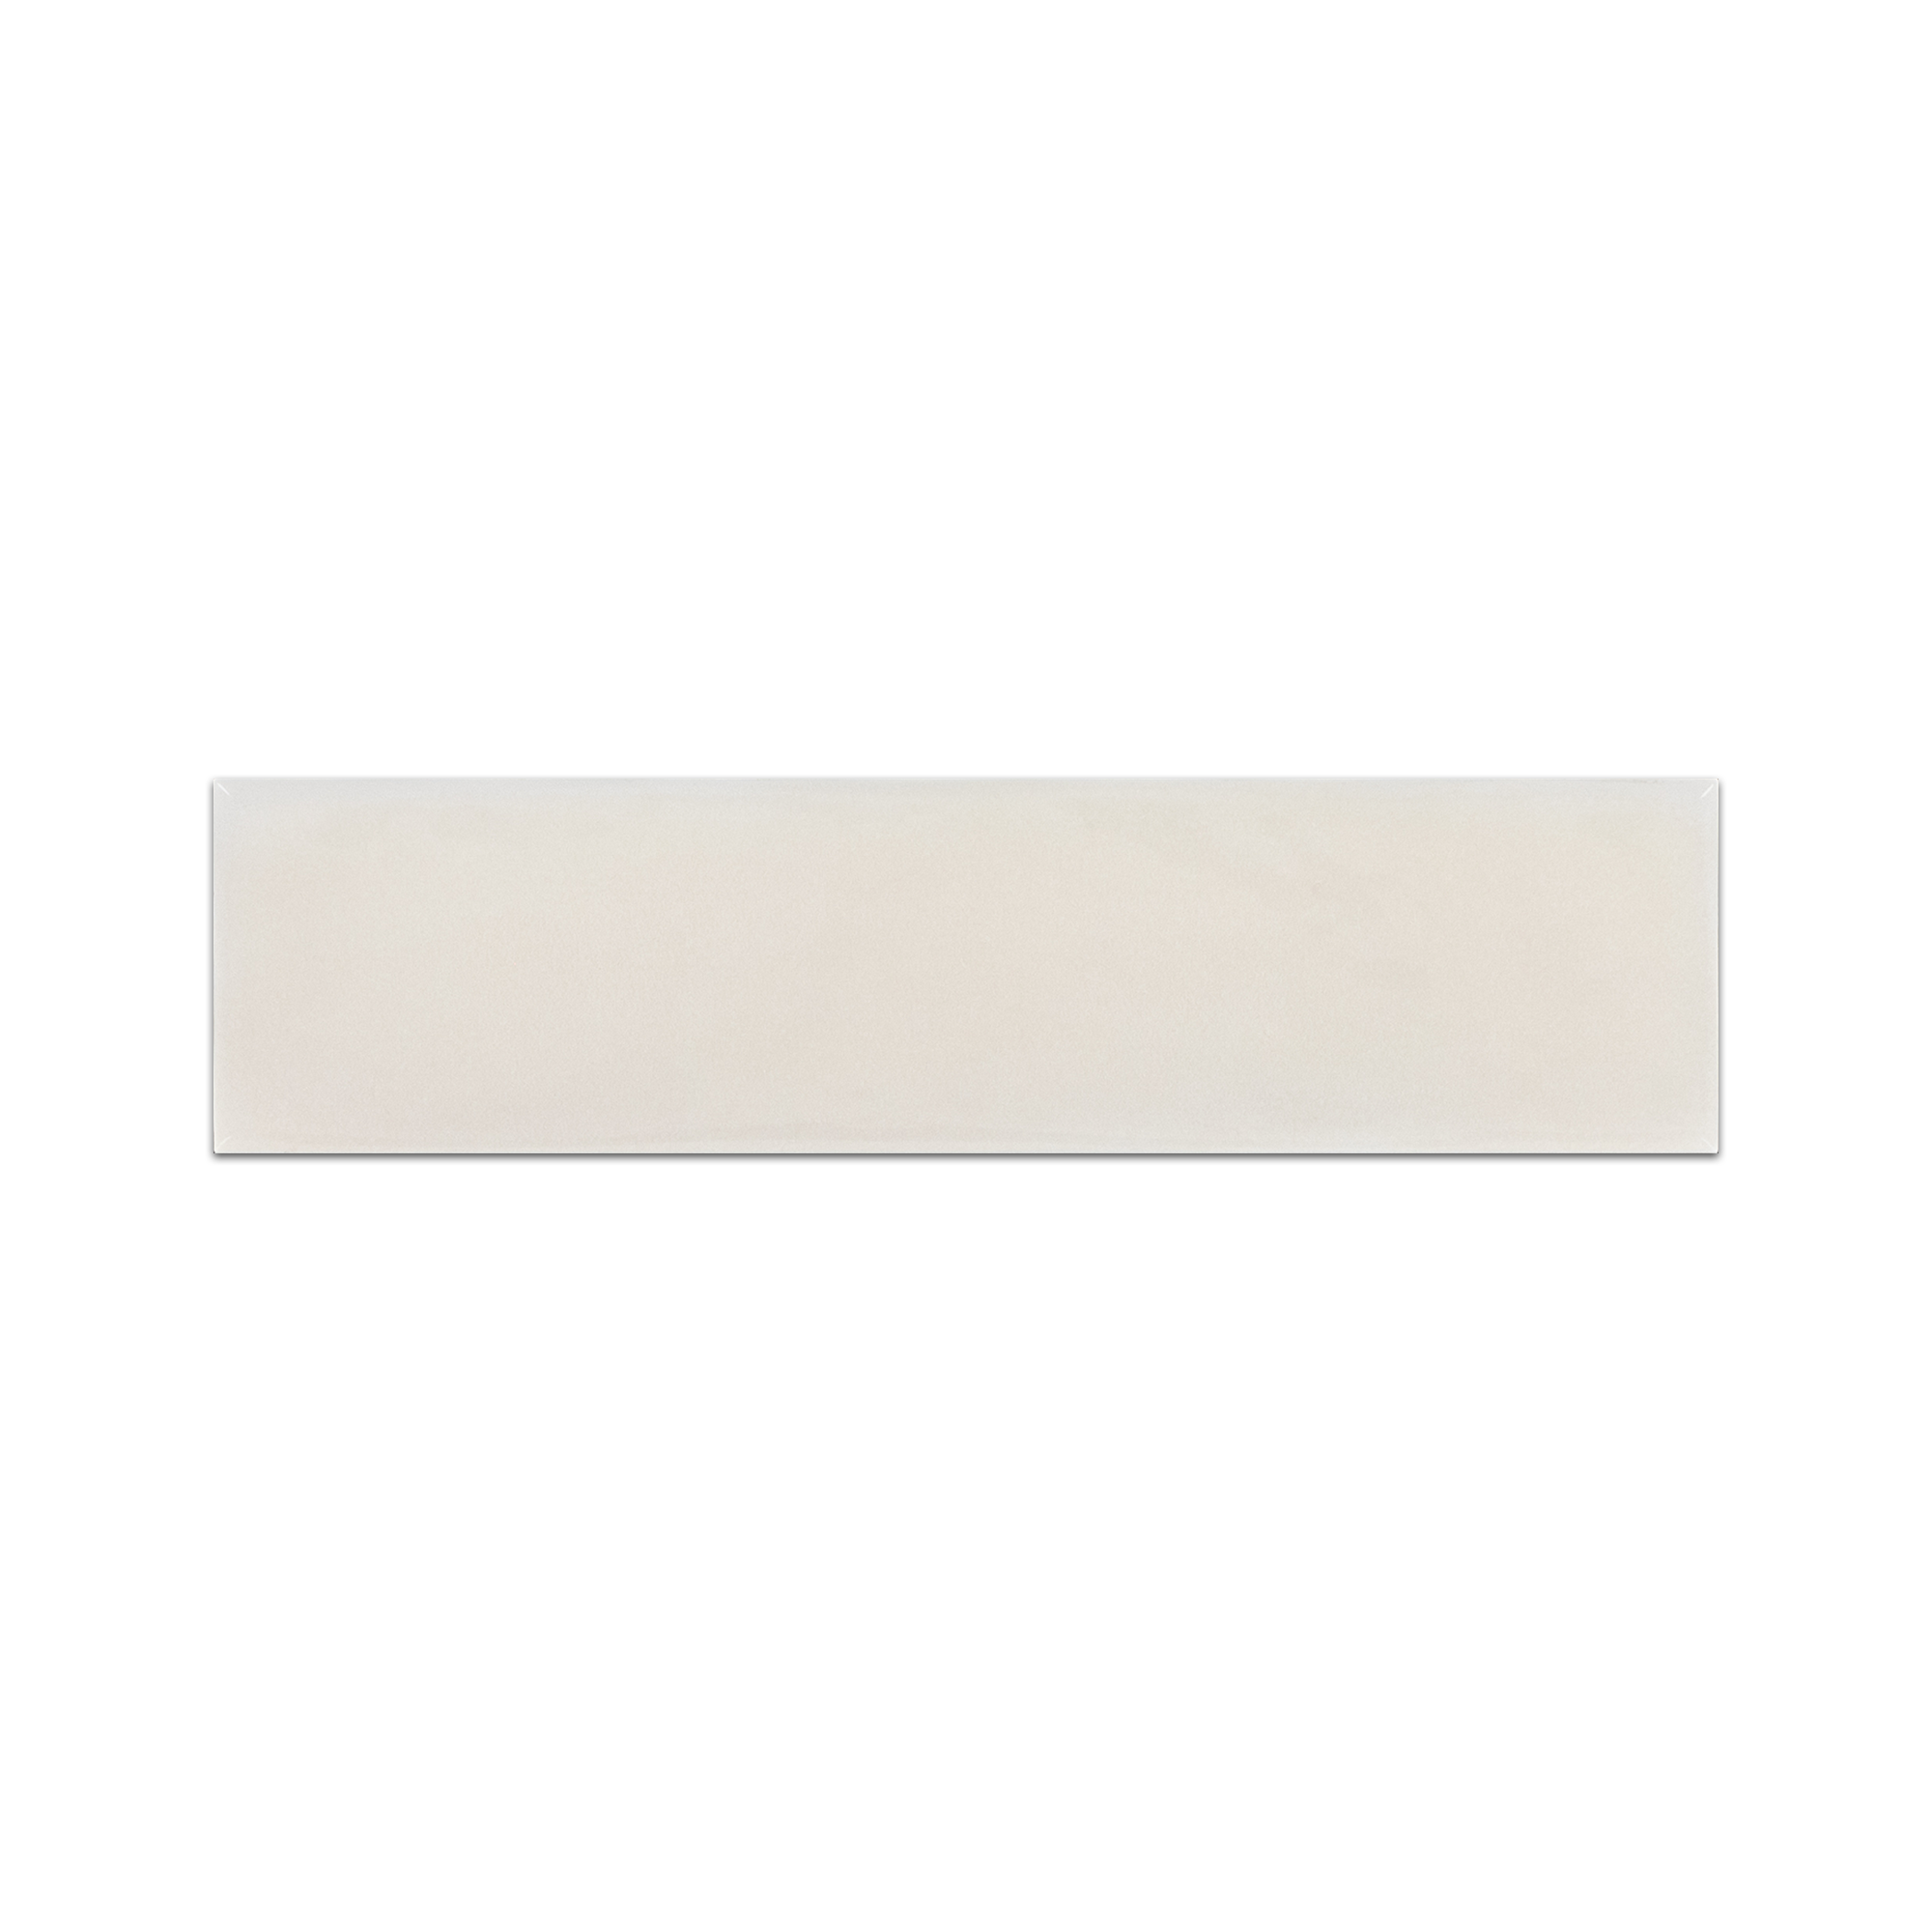 Elon Opal Ivory Ceramic Rectangle Wall Tile 3x12x0.3125 Glossy CT110 Surface Group International Product